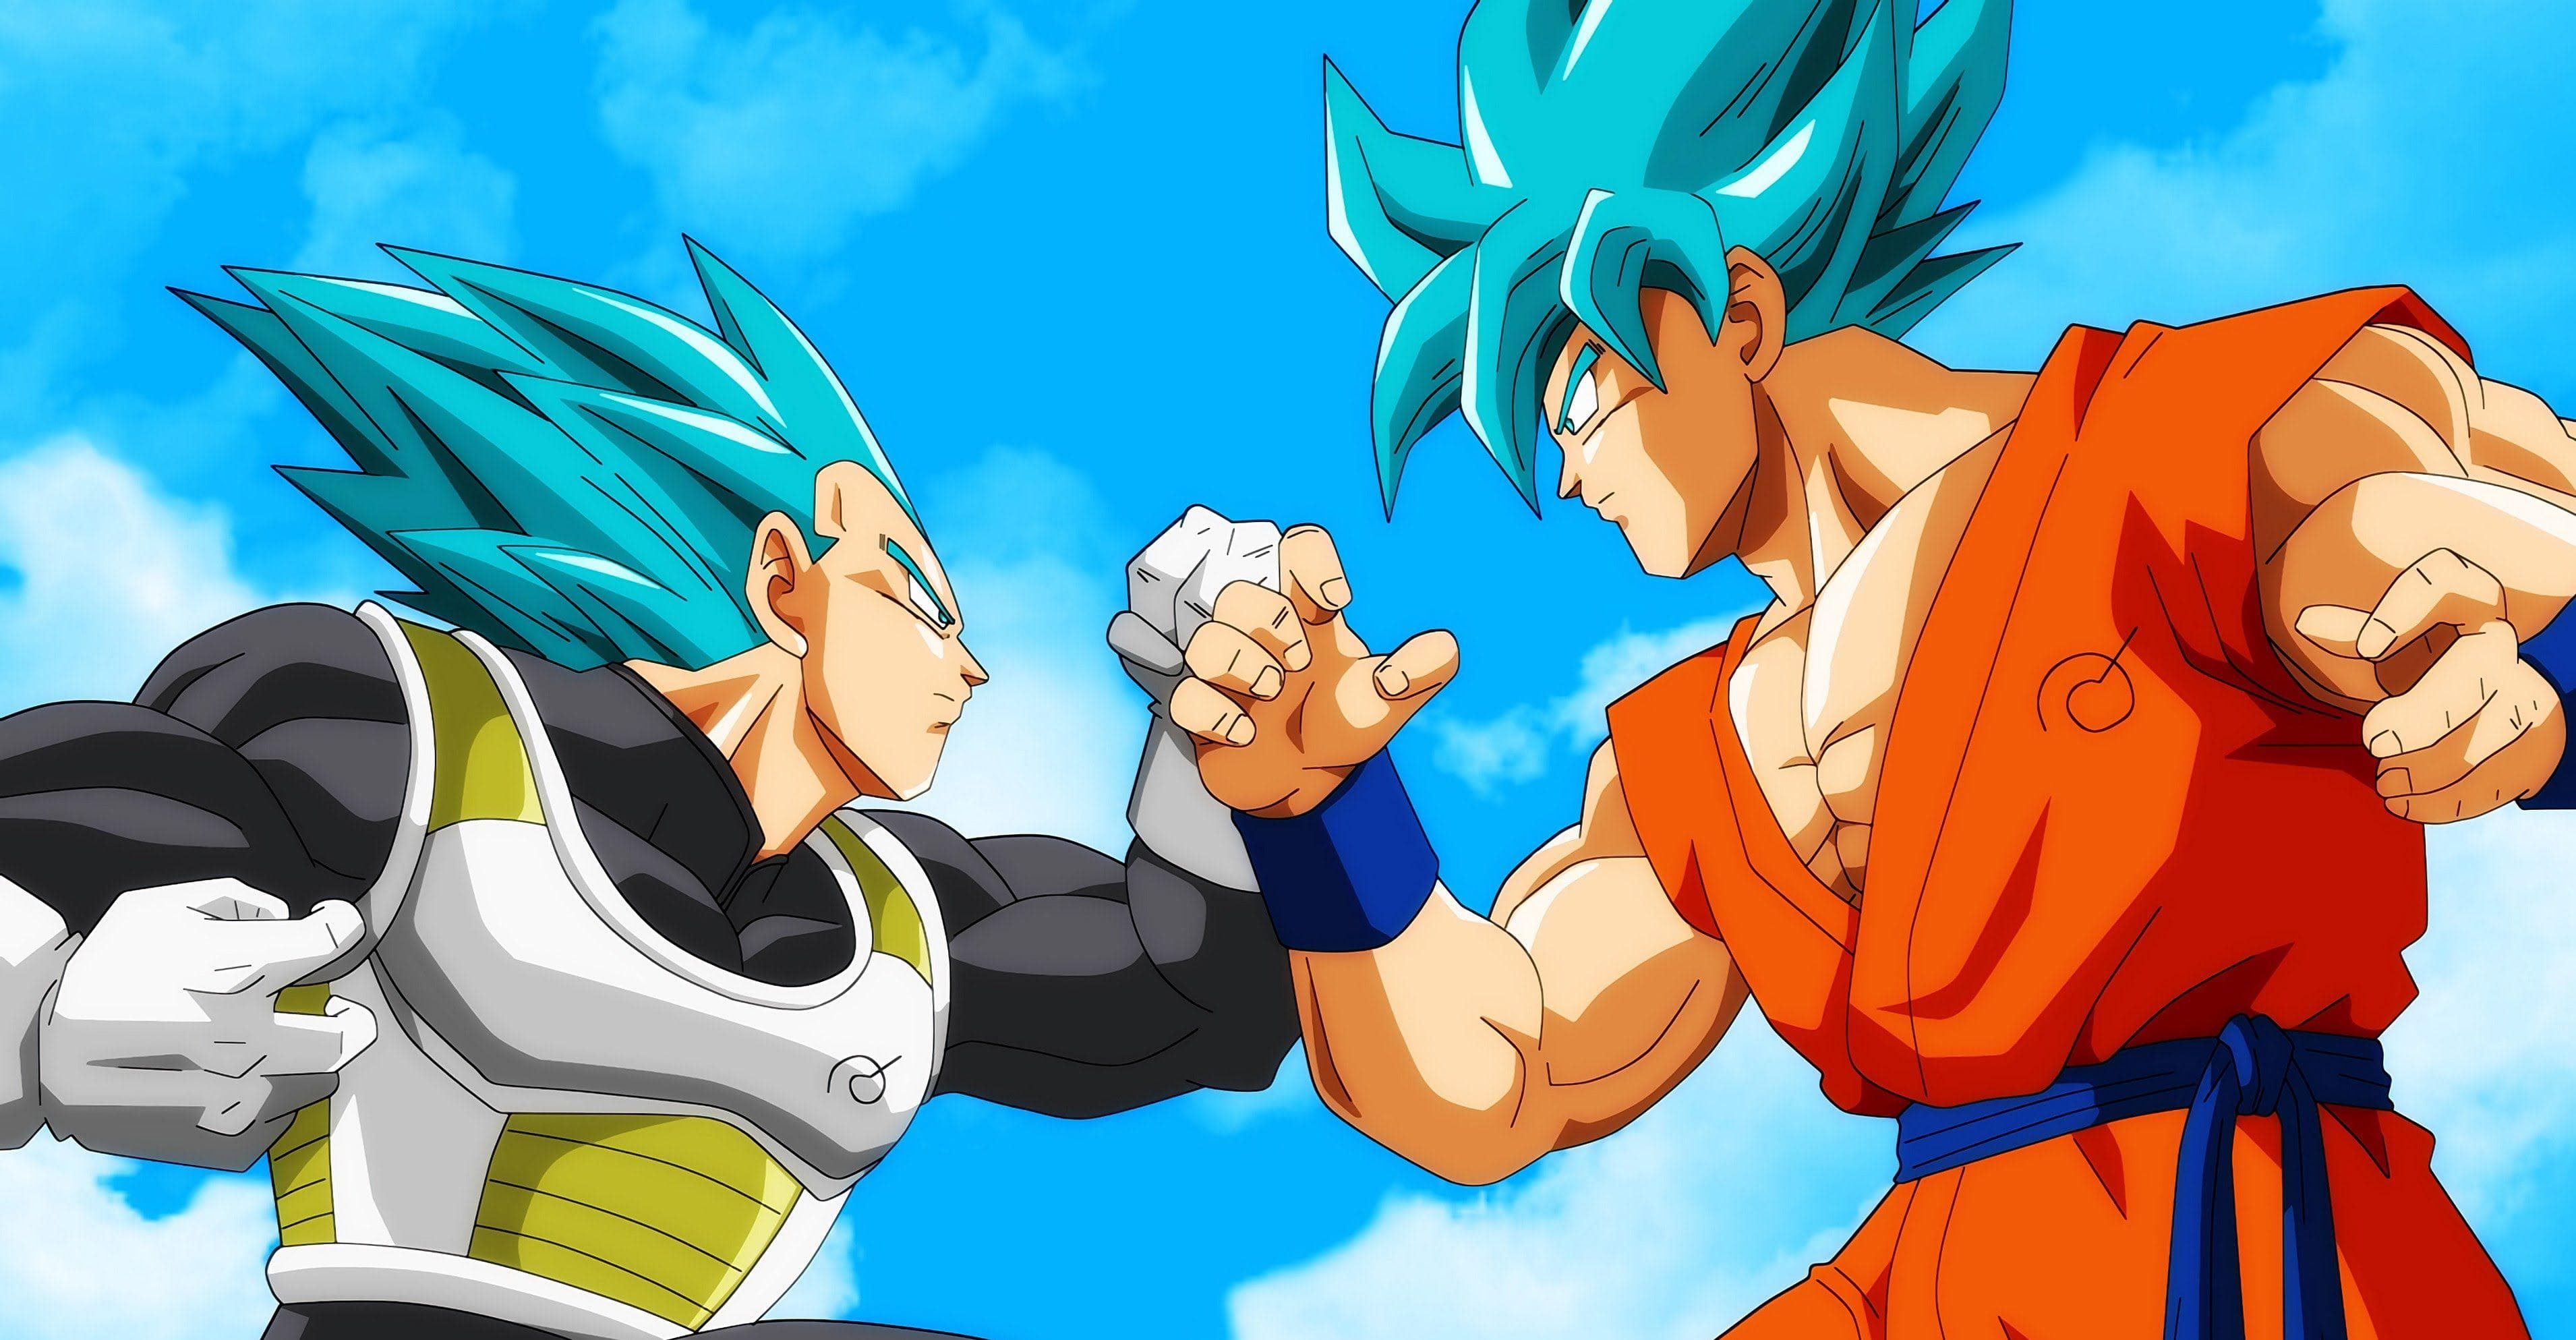 7 Theories About Why Vegeta Never Surpasses Goku in Dragon Ball